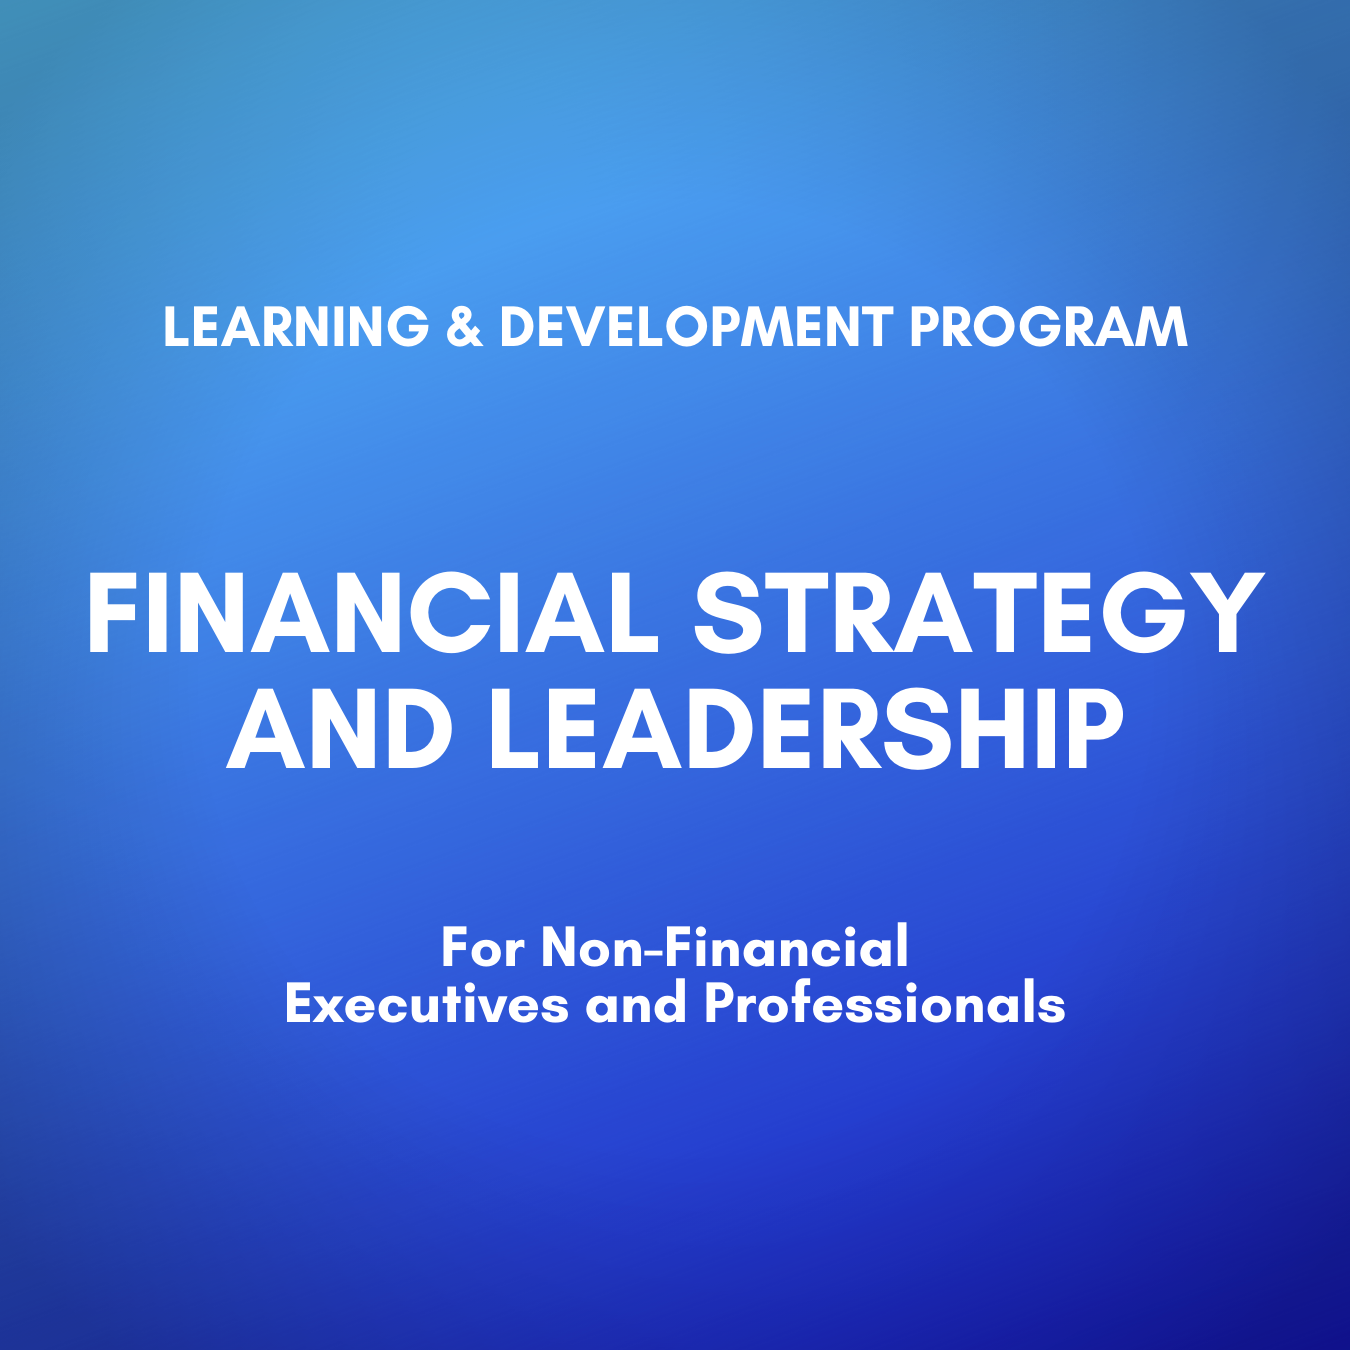 Financial Strategy and Leadership for Non-Financial Executives and Professionals